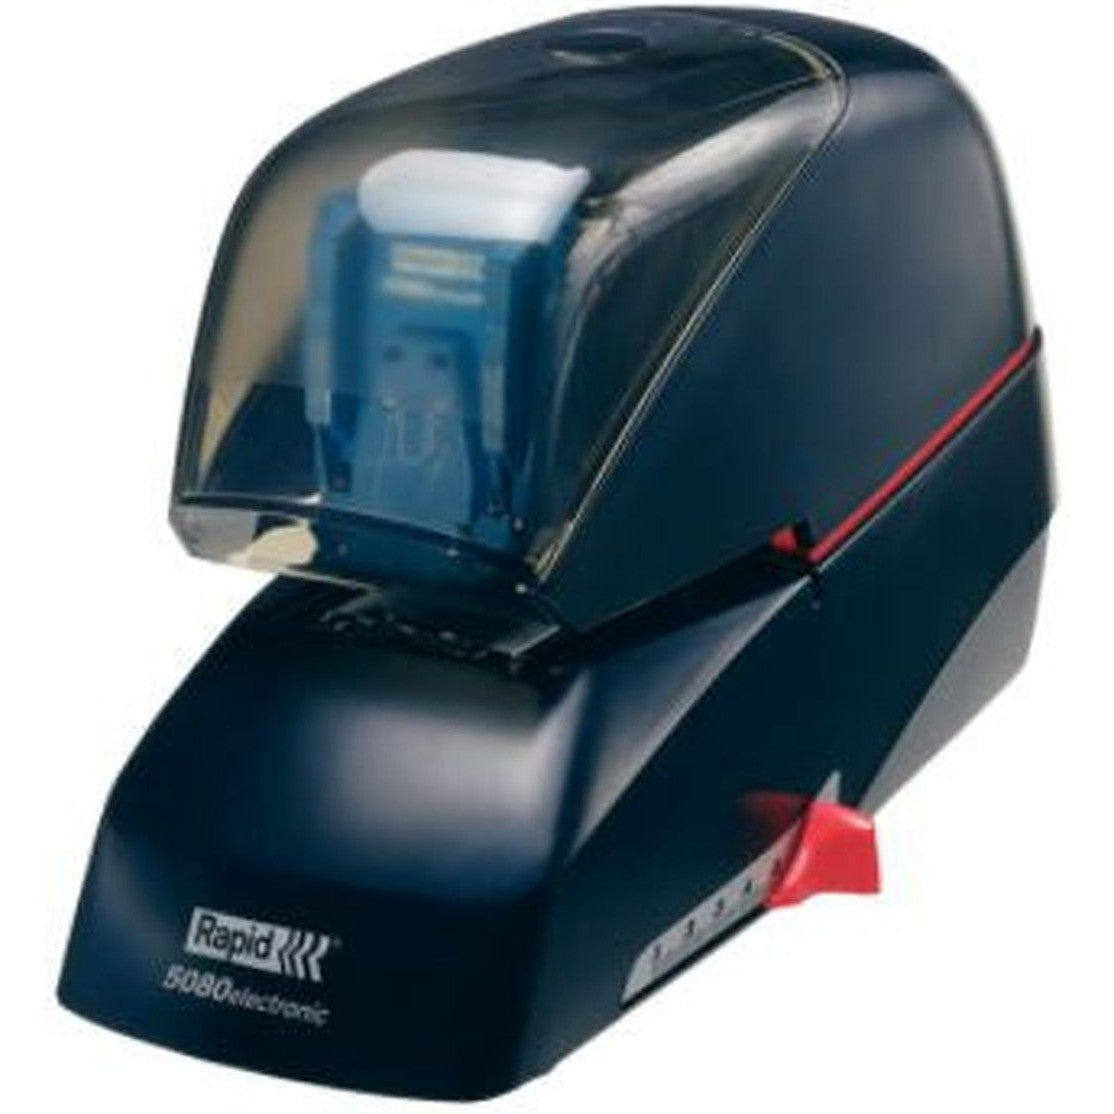 Electric Stapler Rapid 5080E-Stationery Staplers And Staples-Other-Star Light Kuwait